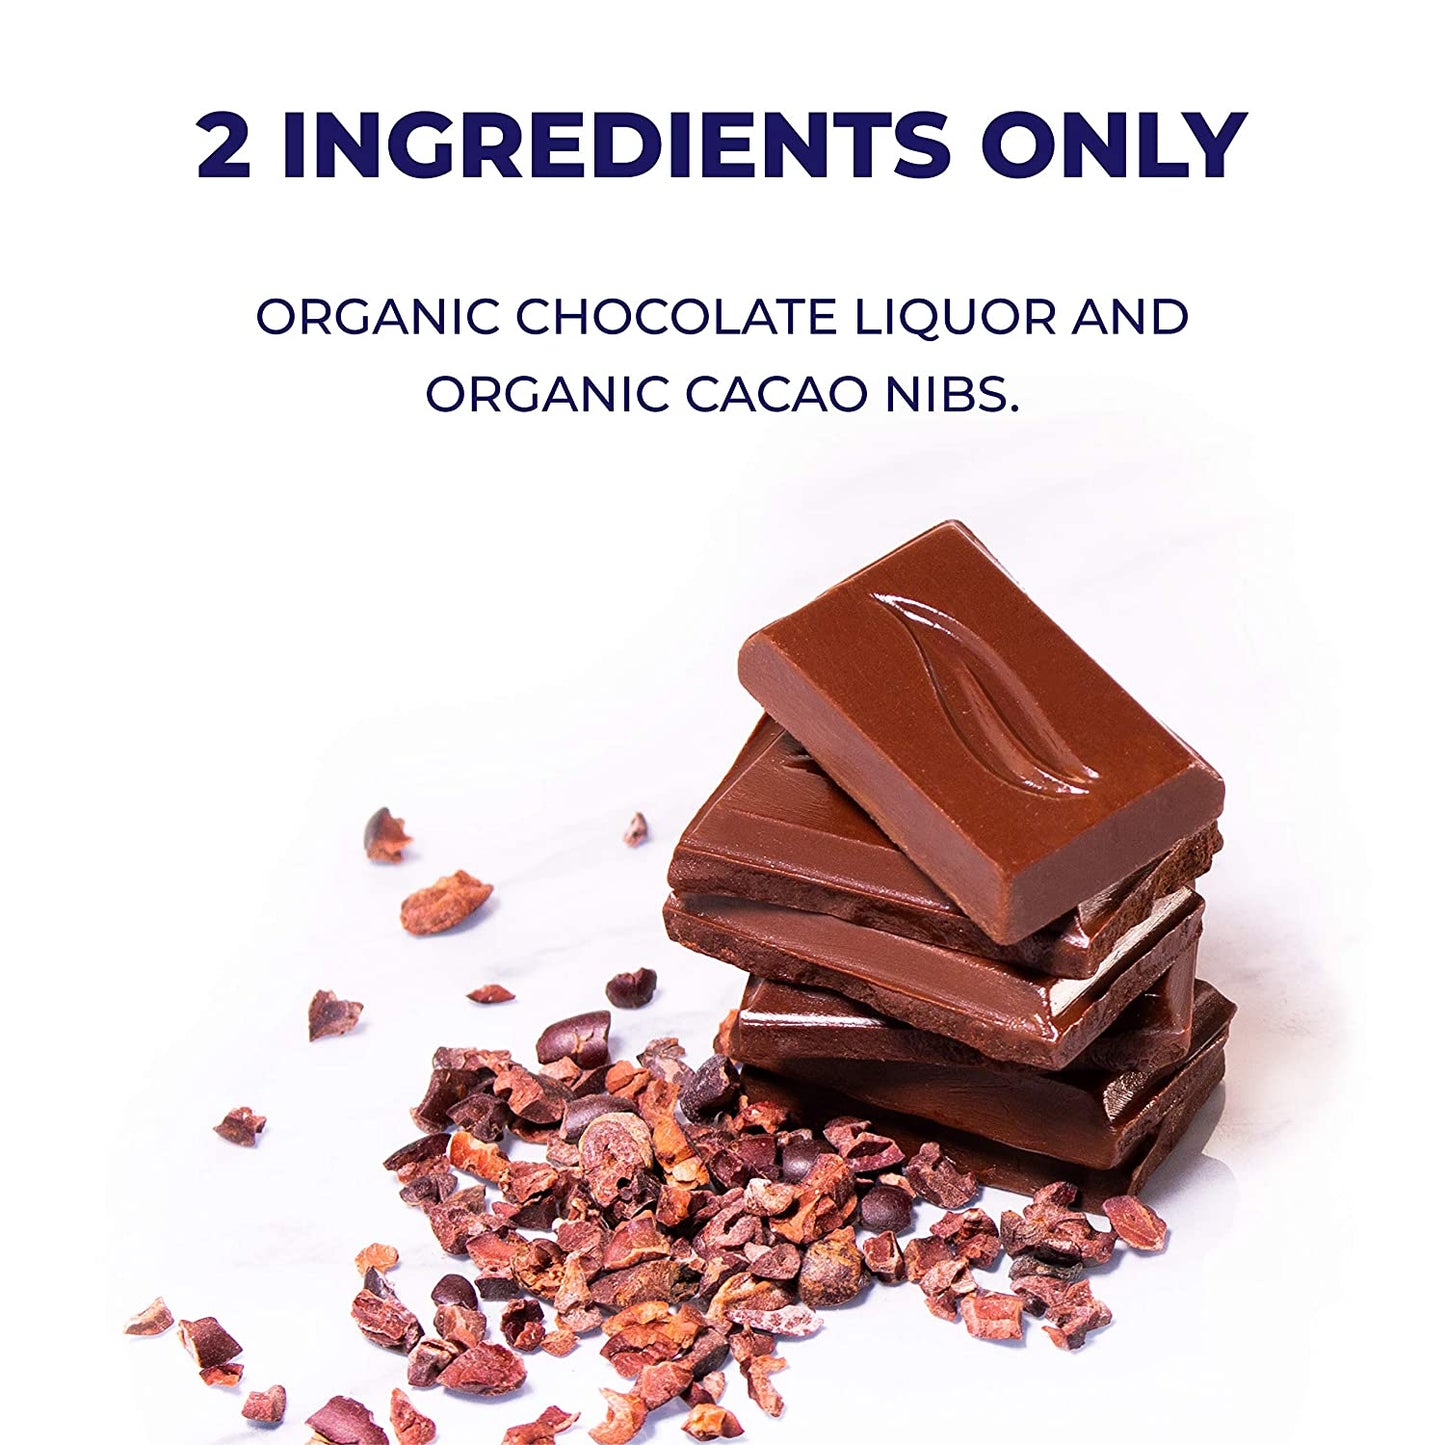 2 Ingredients Only Organic Chocolate Liquor And Organic Cacao Nibs In Pascha 100% Cacao Dark Chocolate Bars